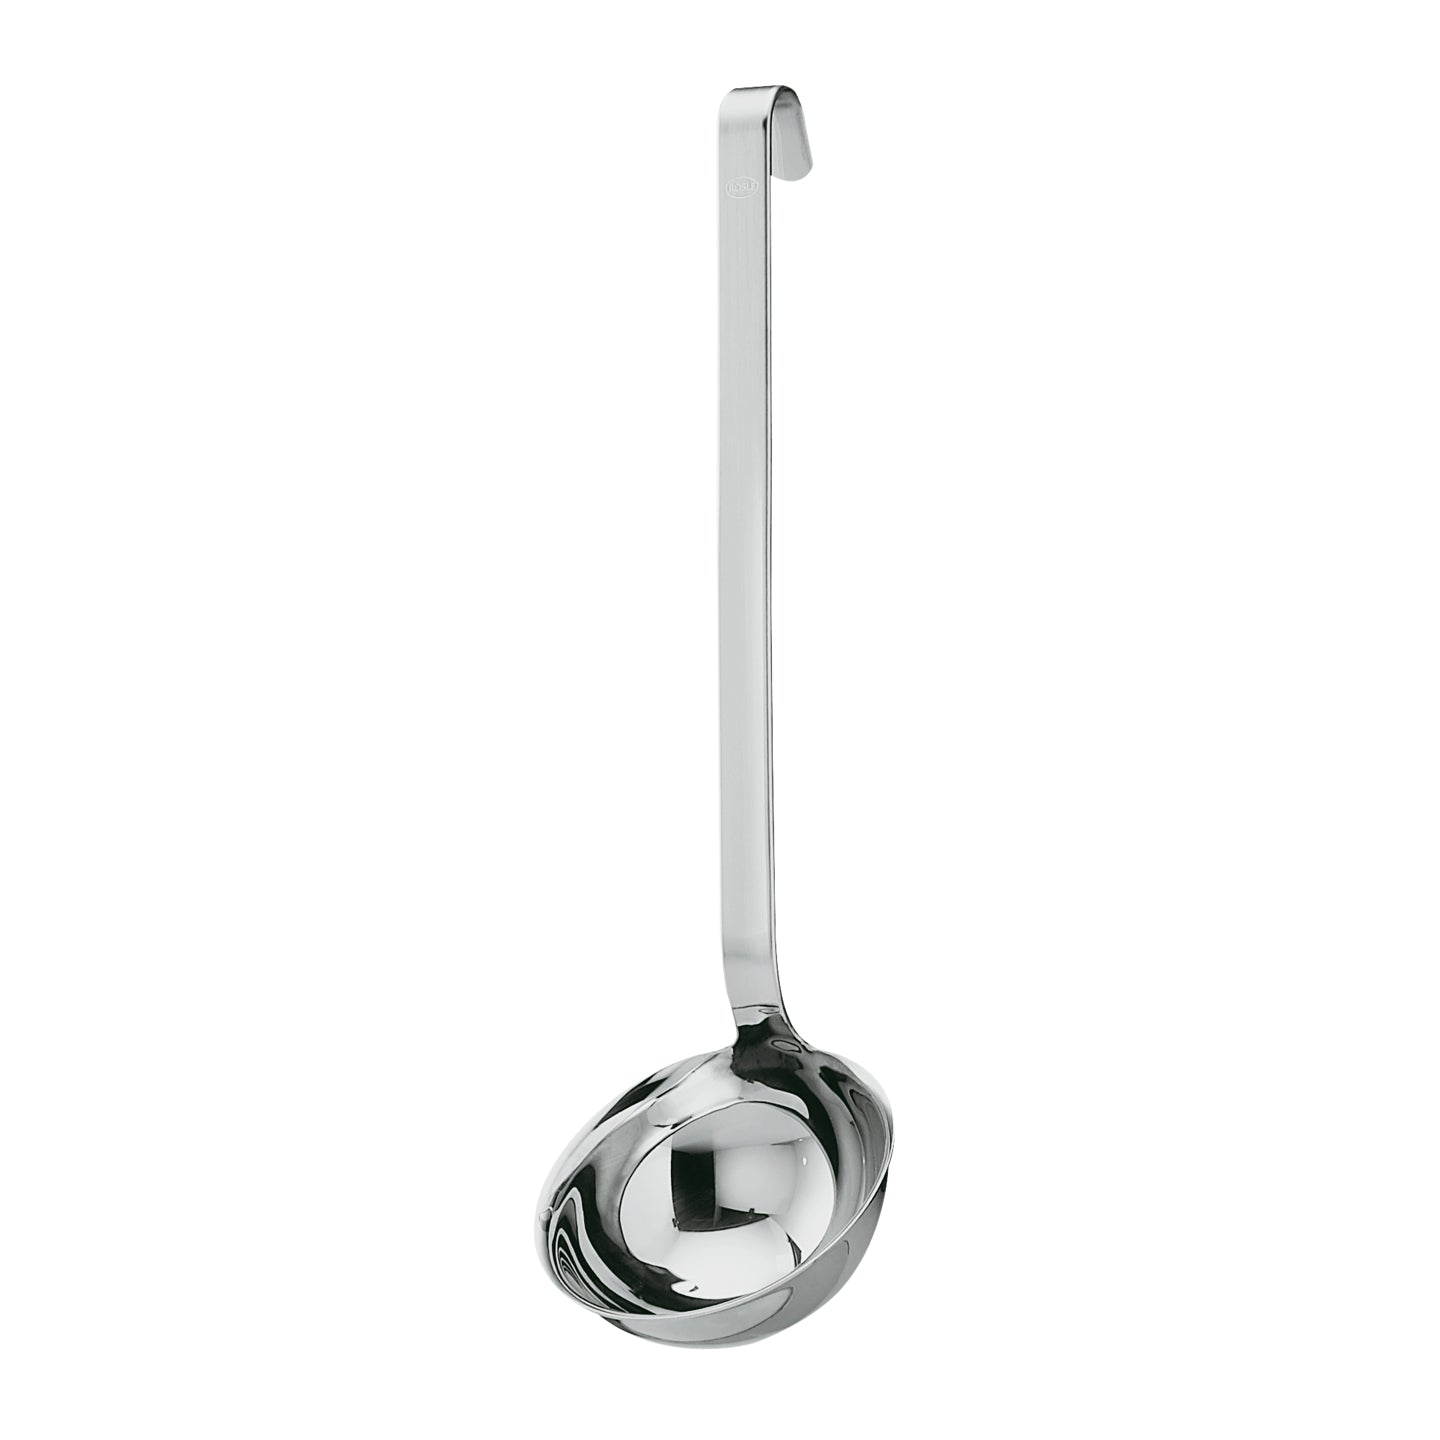 Rosle Hook Ladle with Pouring Rim